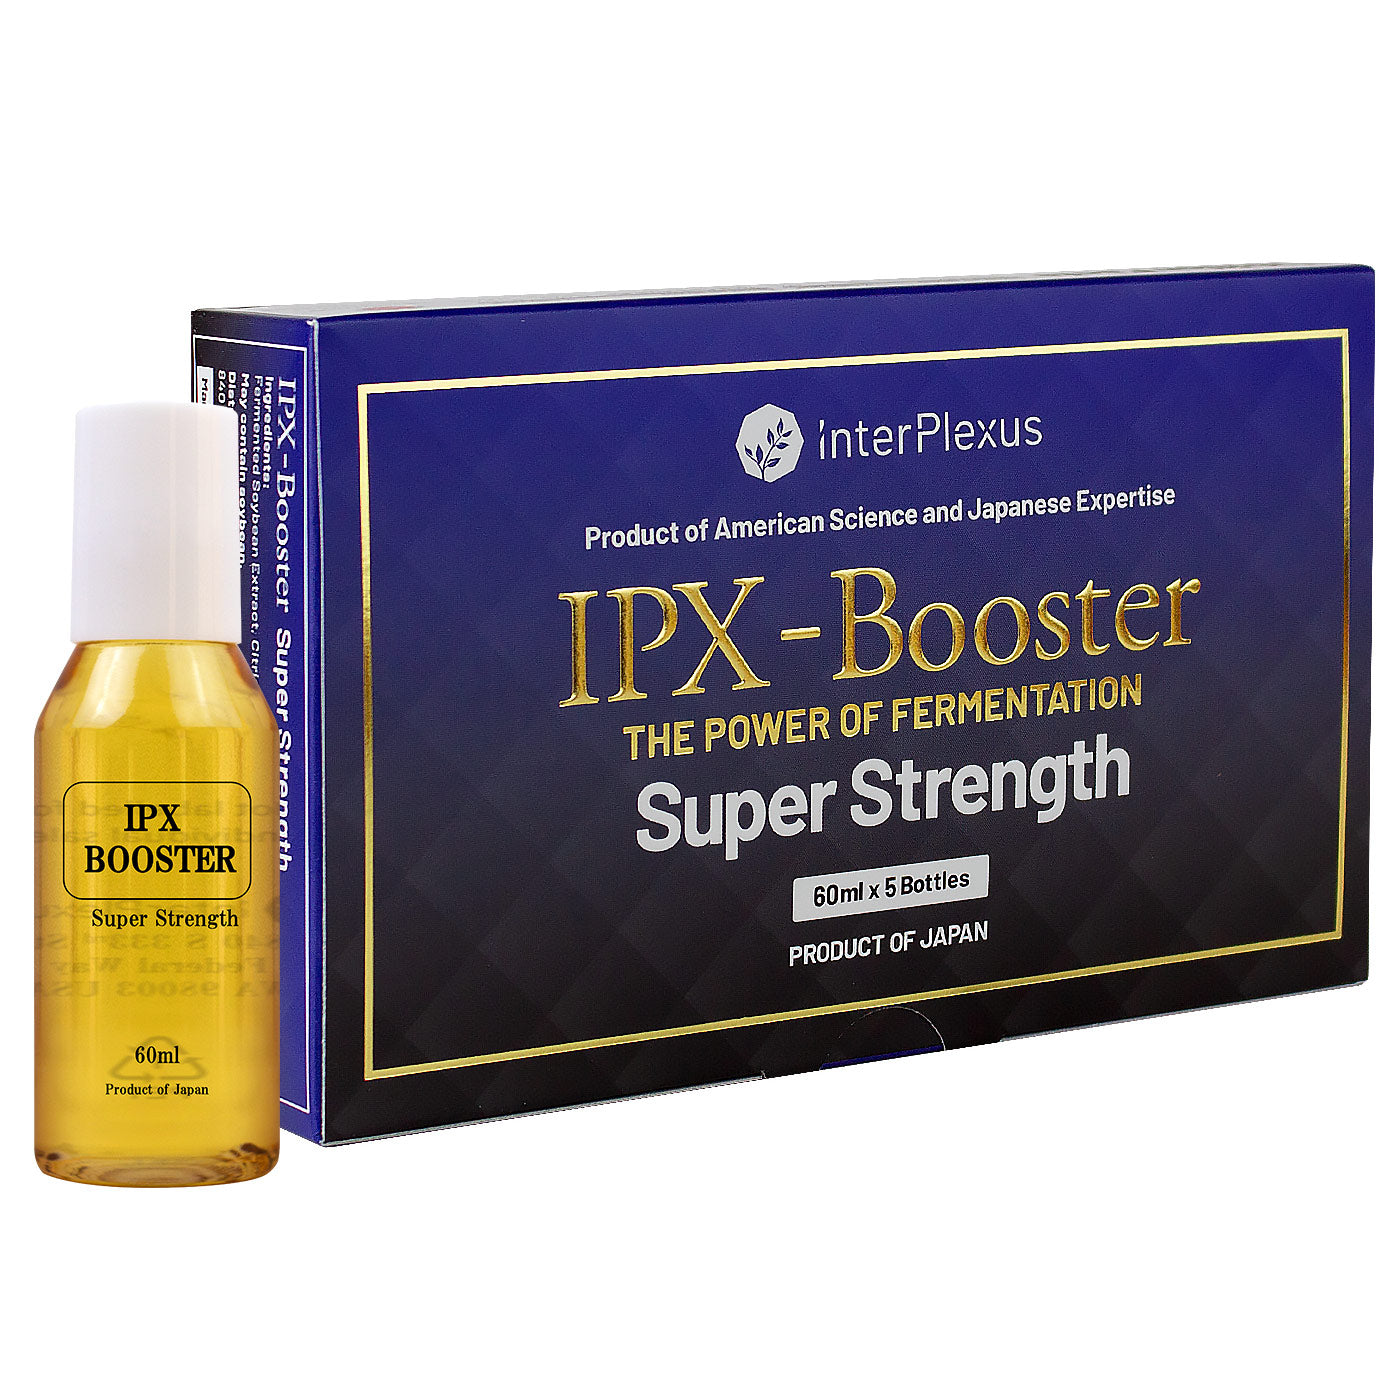 IPX Booster Super Strength Bottle and Box (30 Servings)